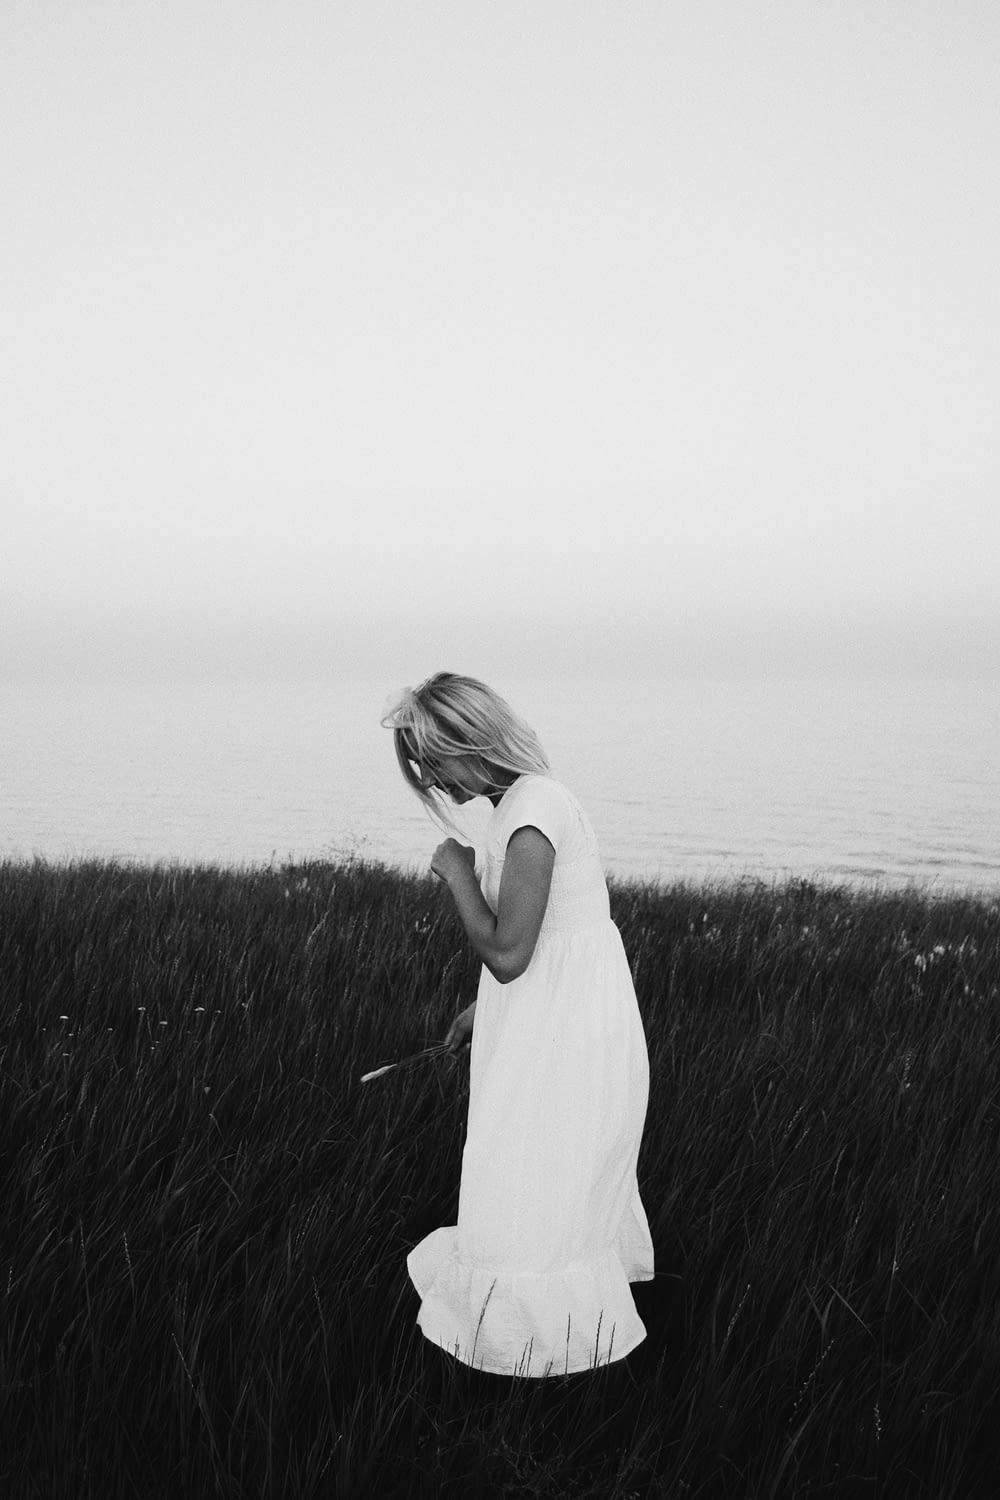 grayscale photography of woman wearing dress standing while looking down